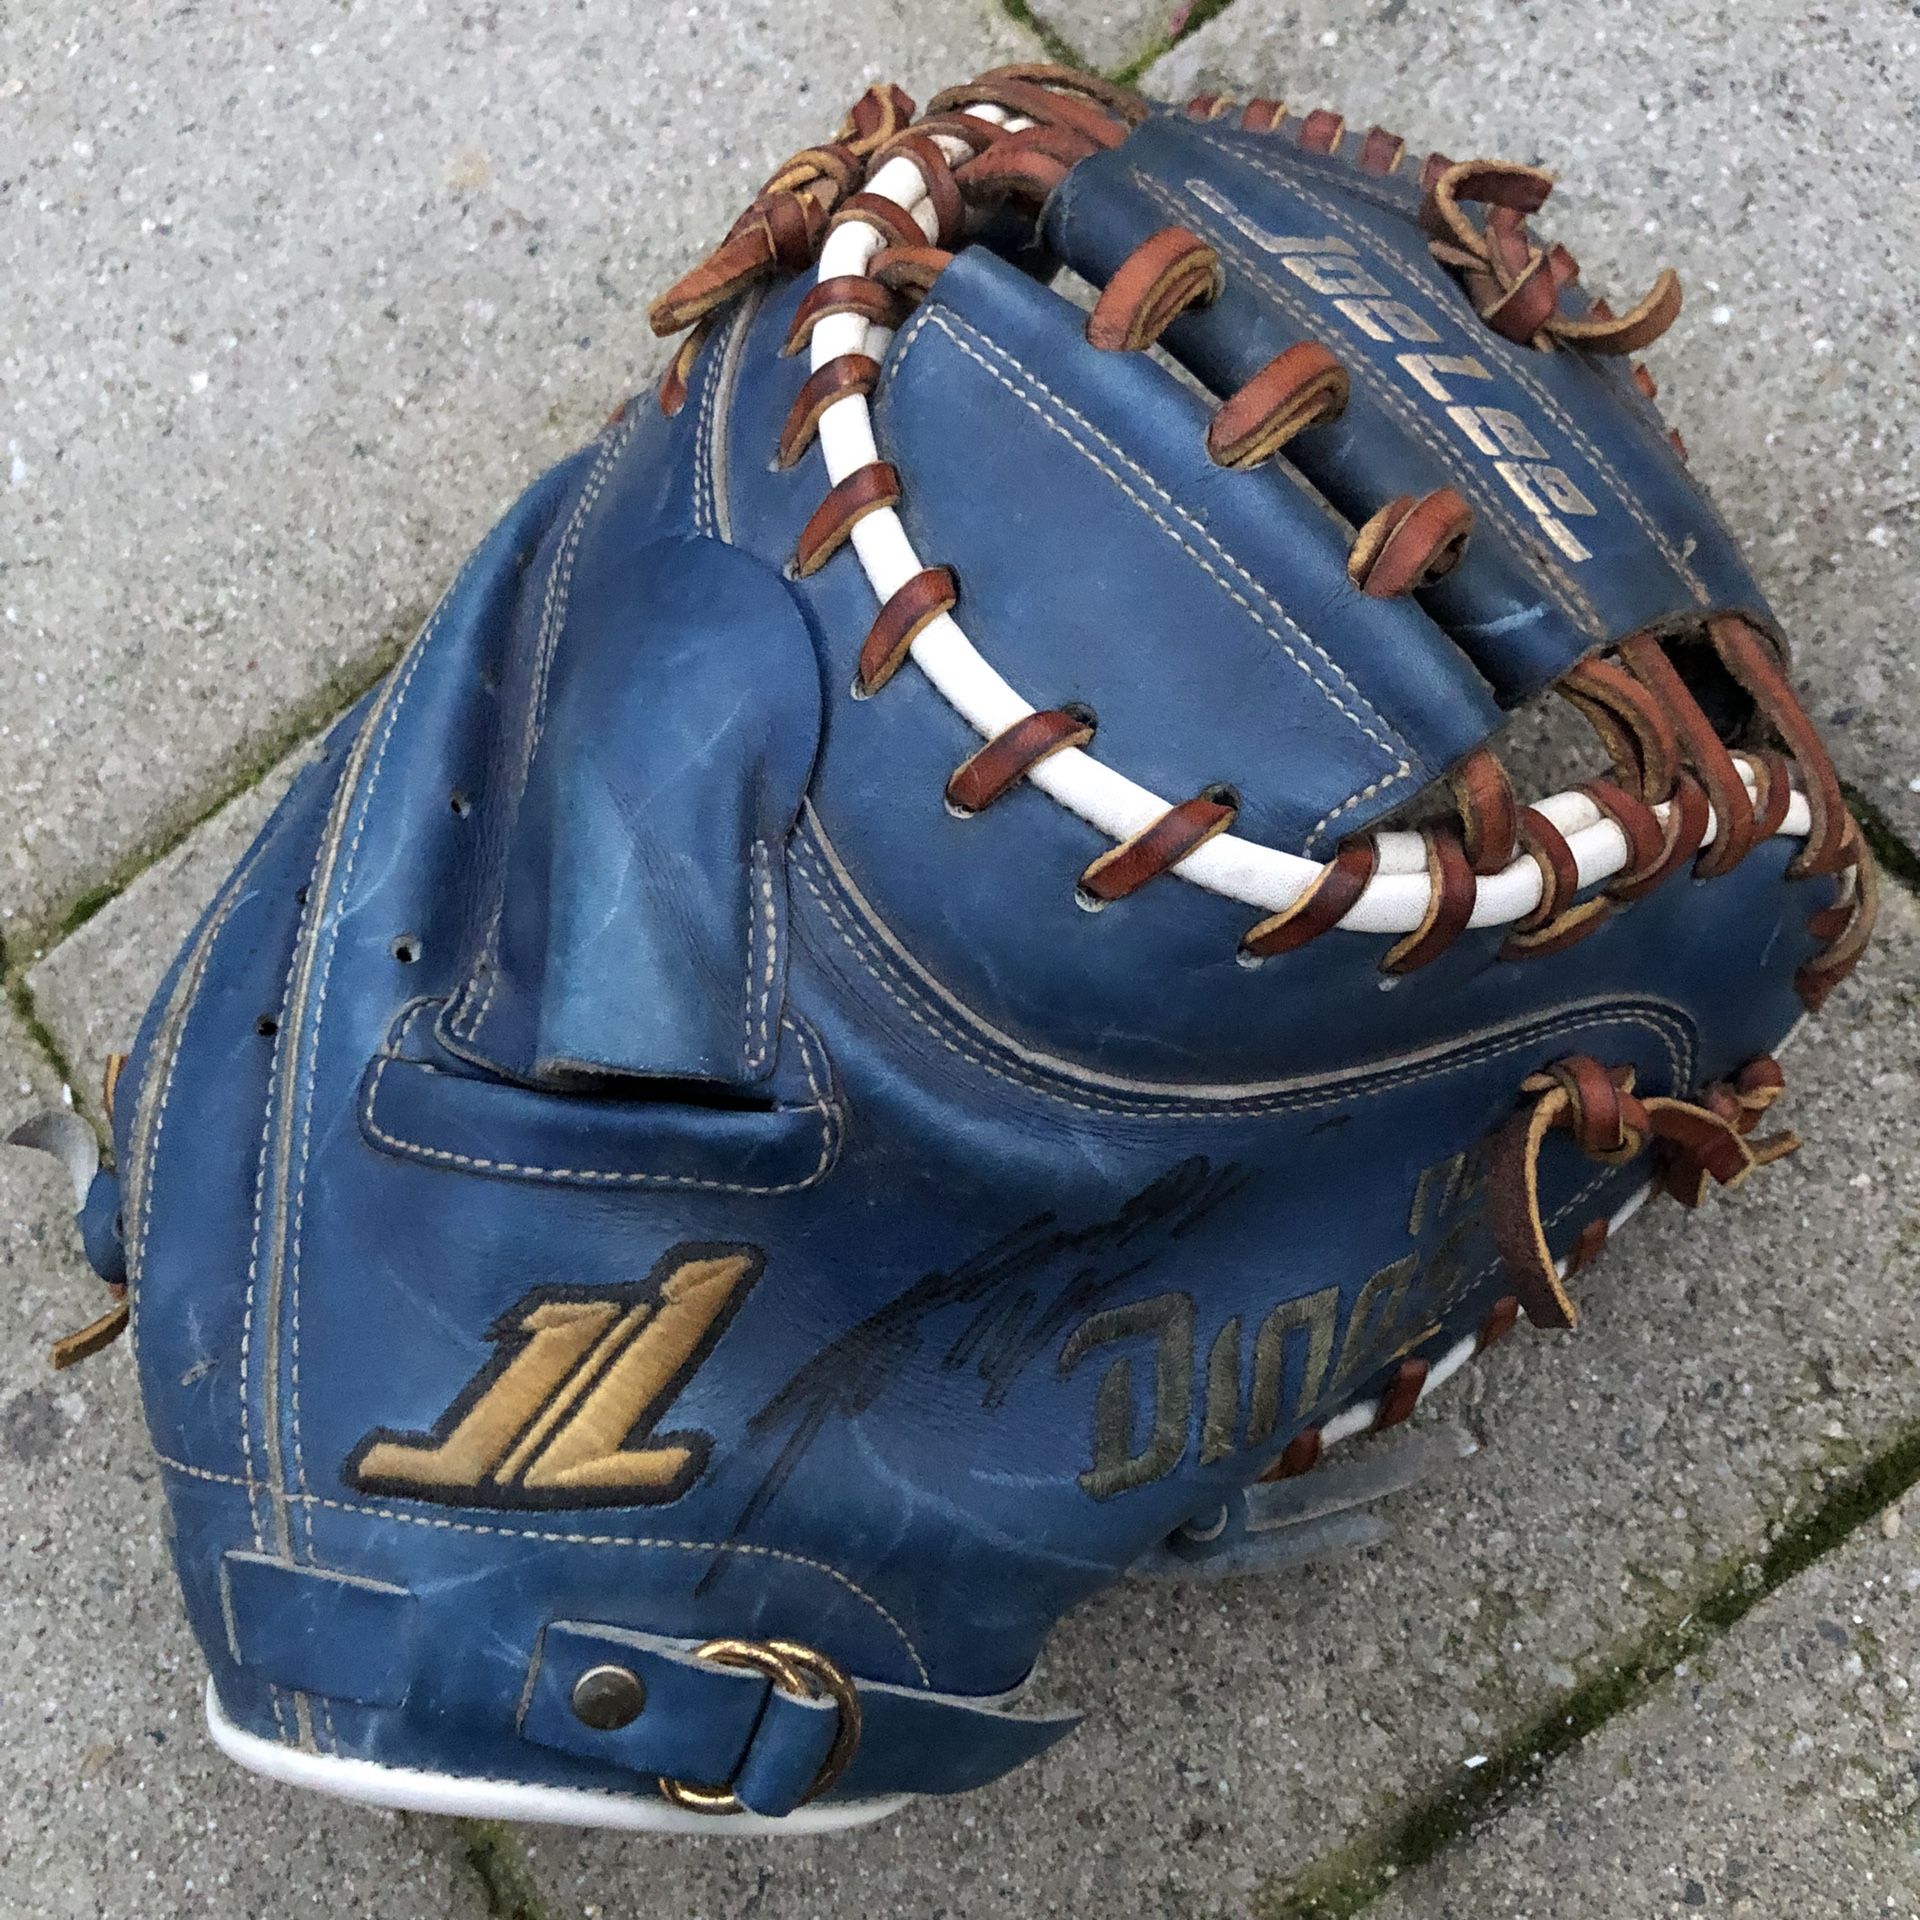 Baseball Catcher Glove Official Pro Glove From The Korean Pro Team The NC Dinos Very Nice Quality Glove and in Excellent condition